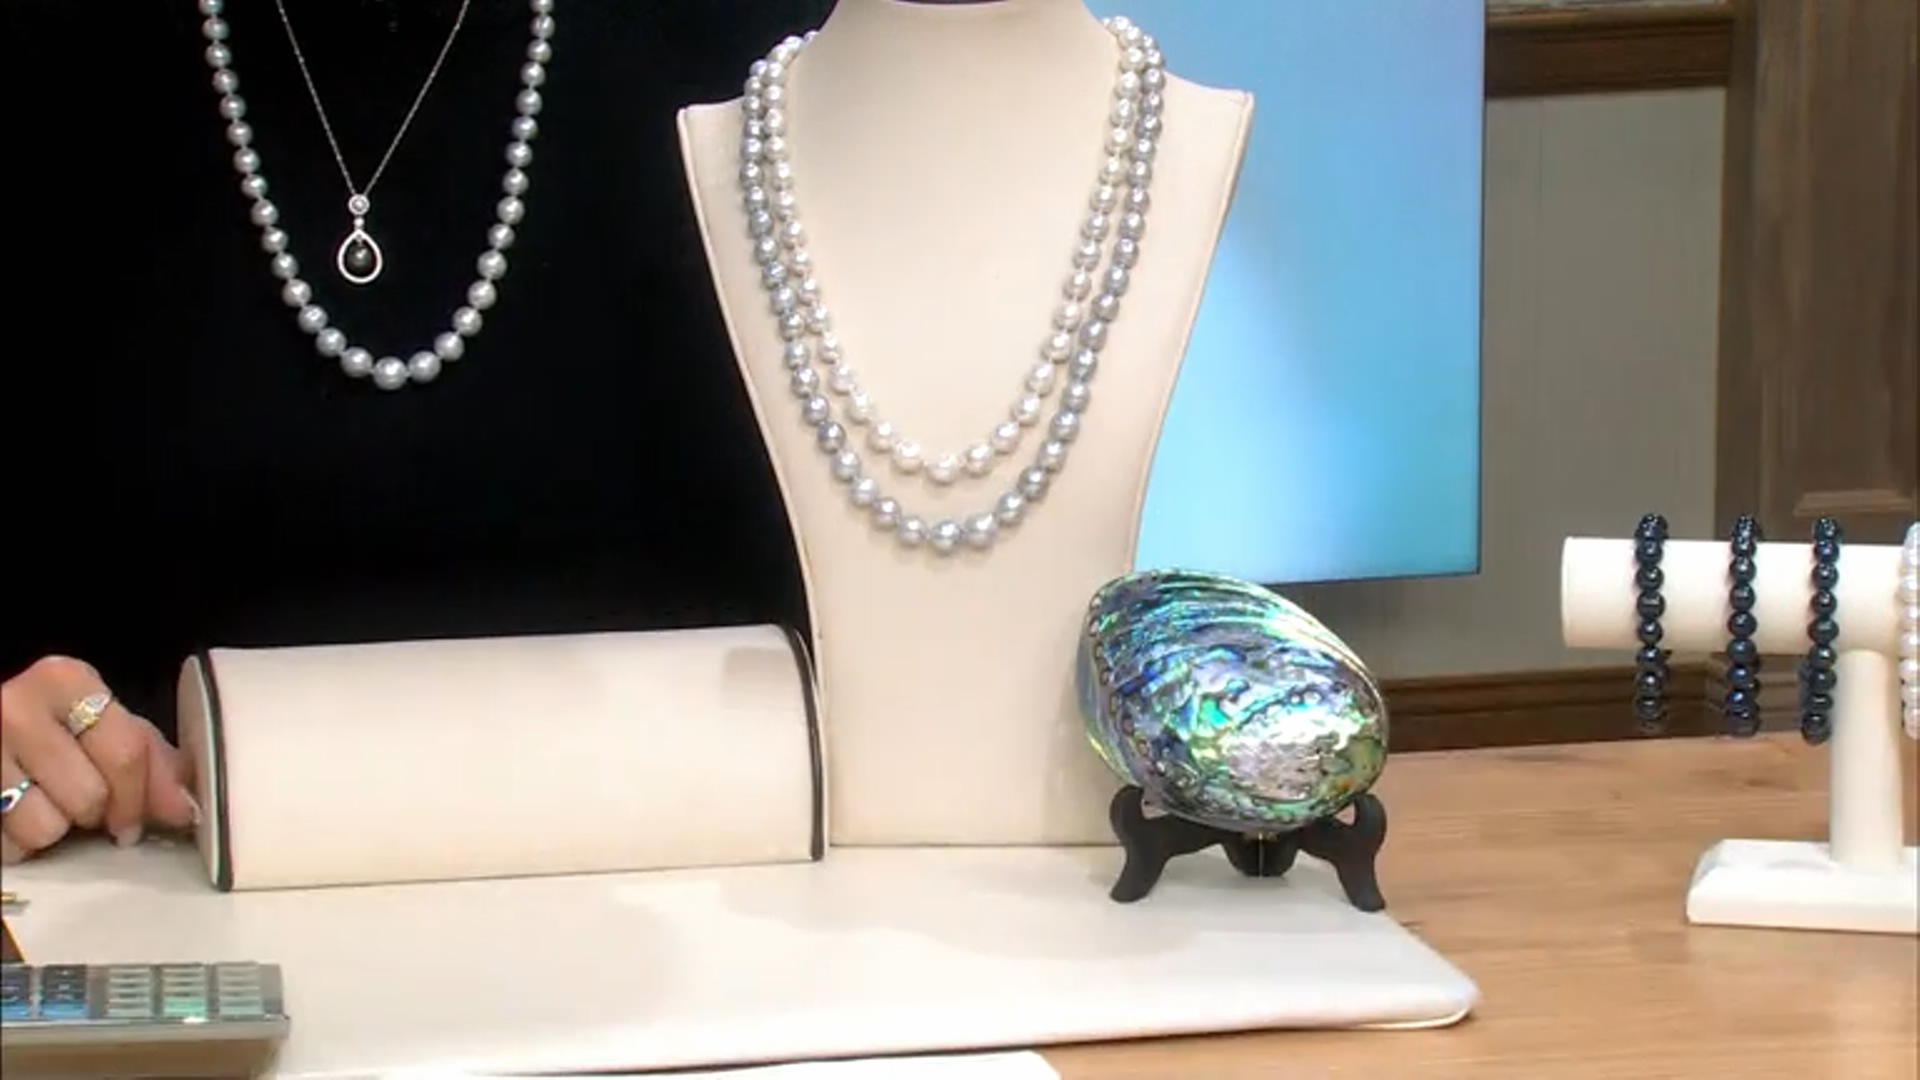 Genusis™ White Cultured Freshwater Pearl Rhodium Over Silver Graduated Strand Necklace Video Thumbnail